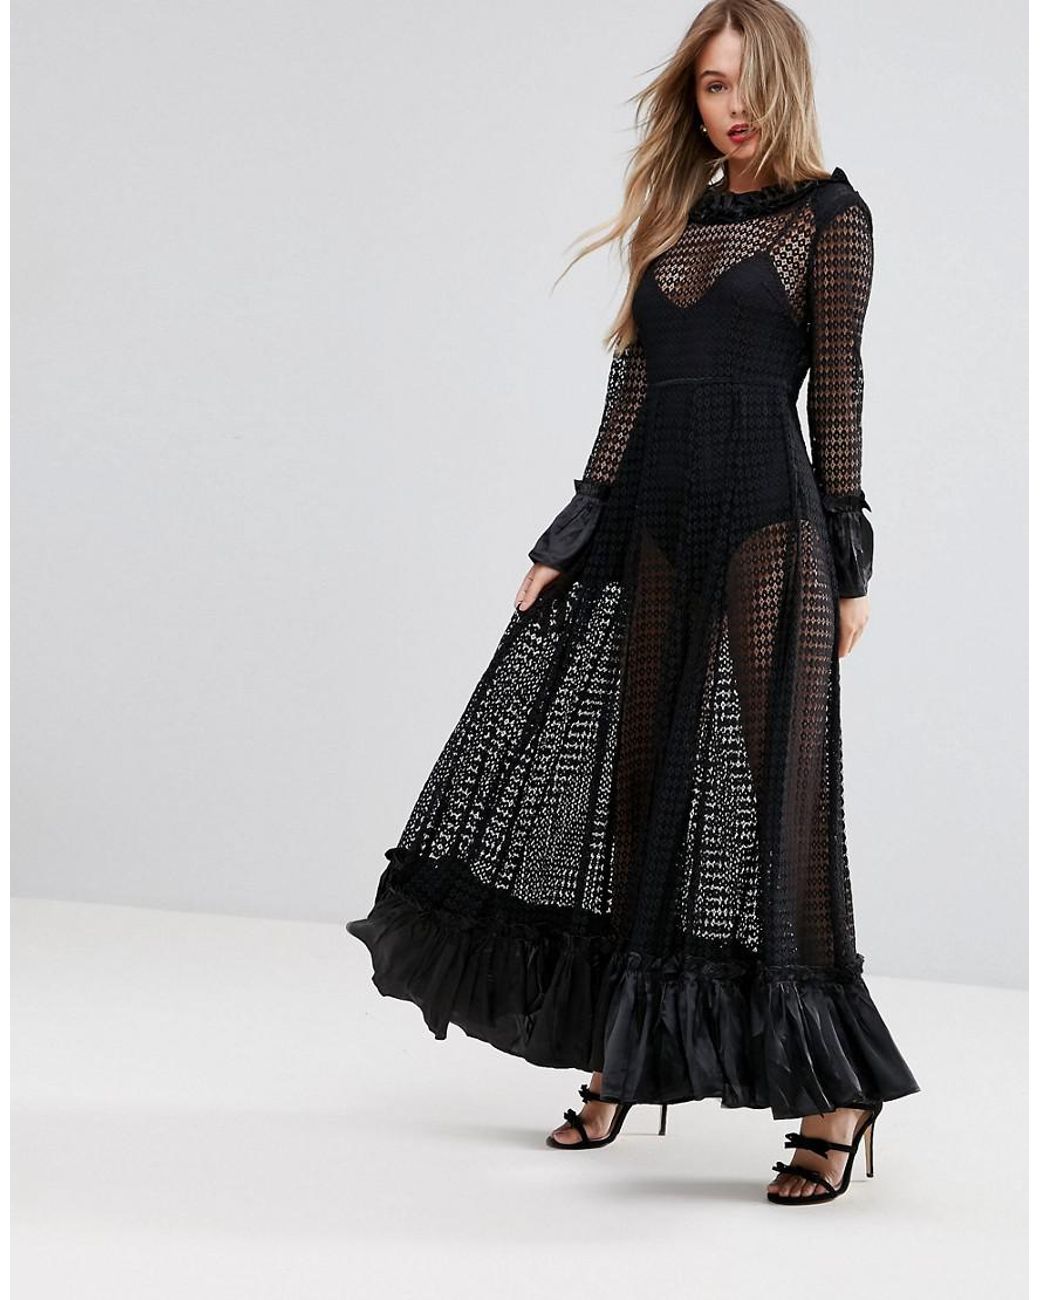 Sheer Maxi Dress - Boutique Sales Chic